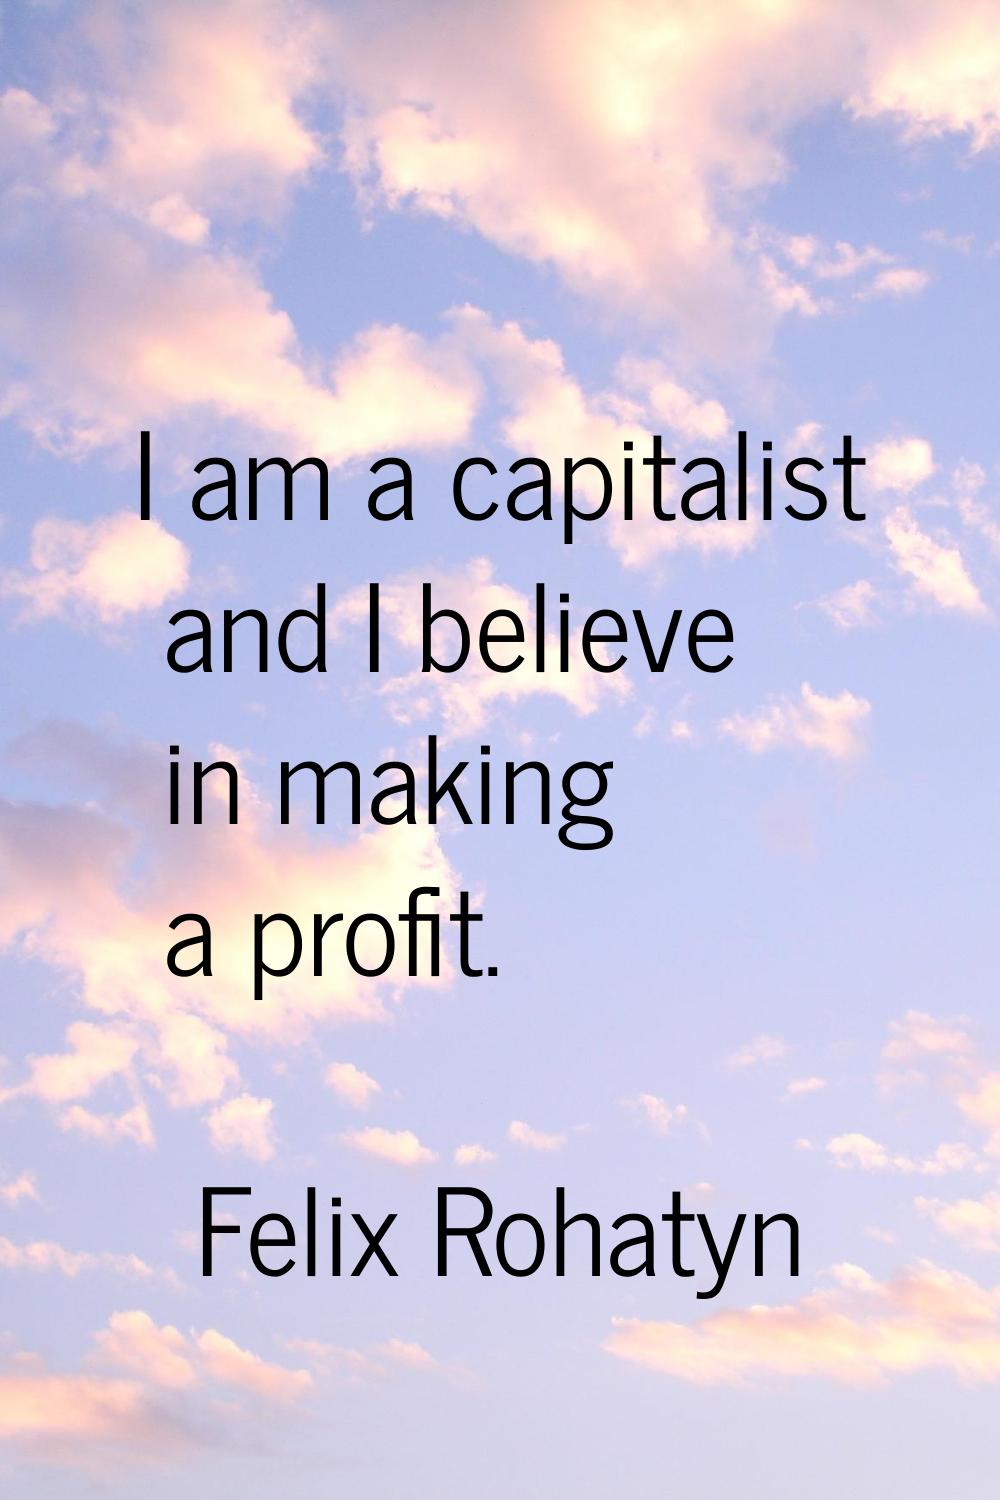 I am a capitalist and I believe in making a profit.